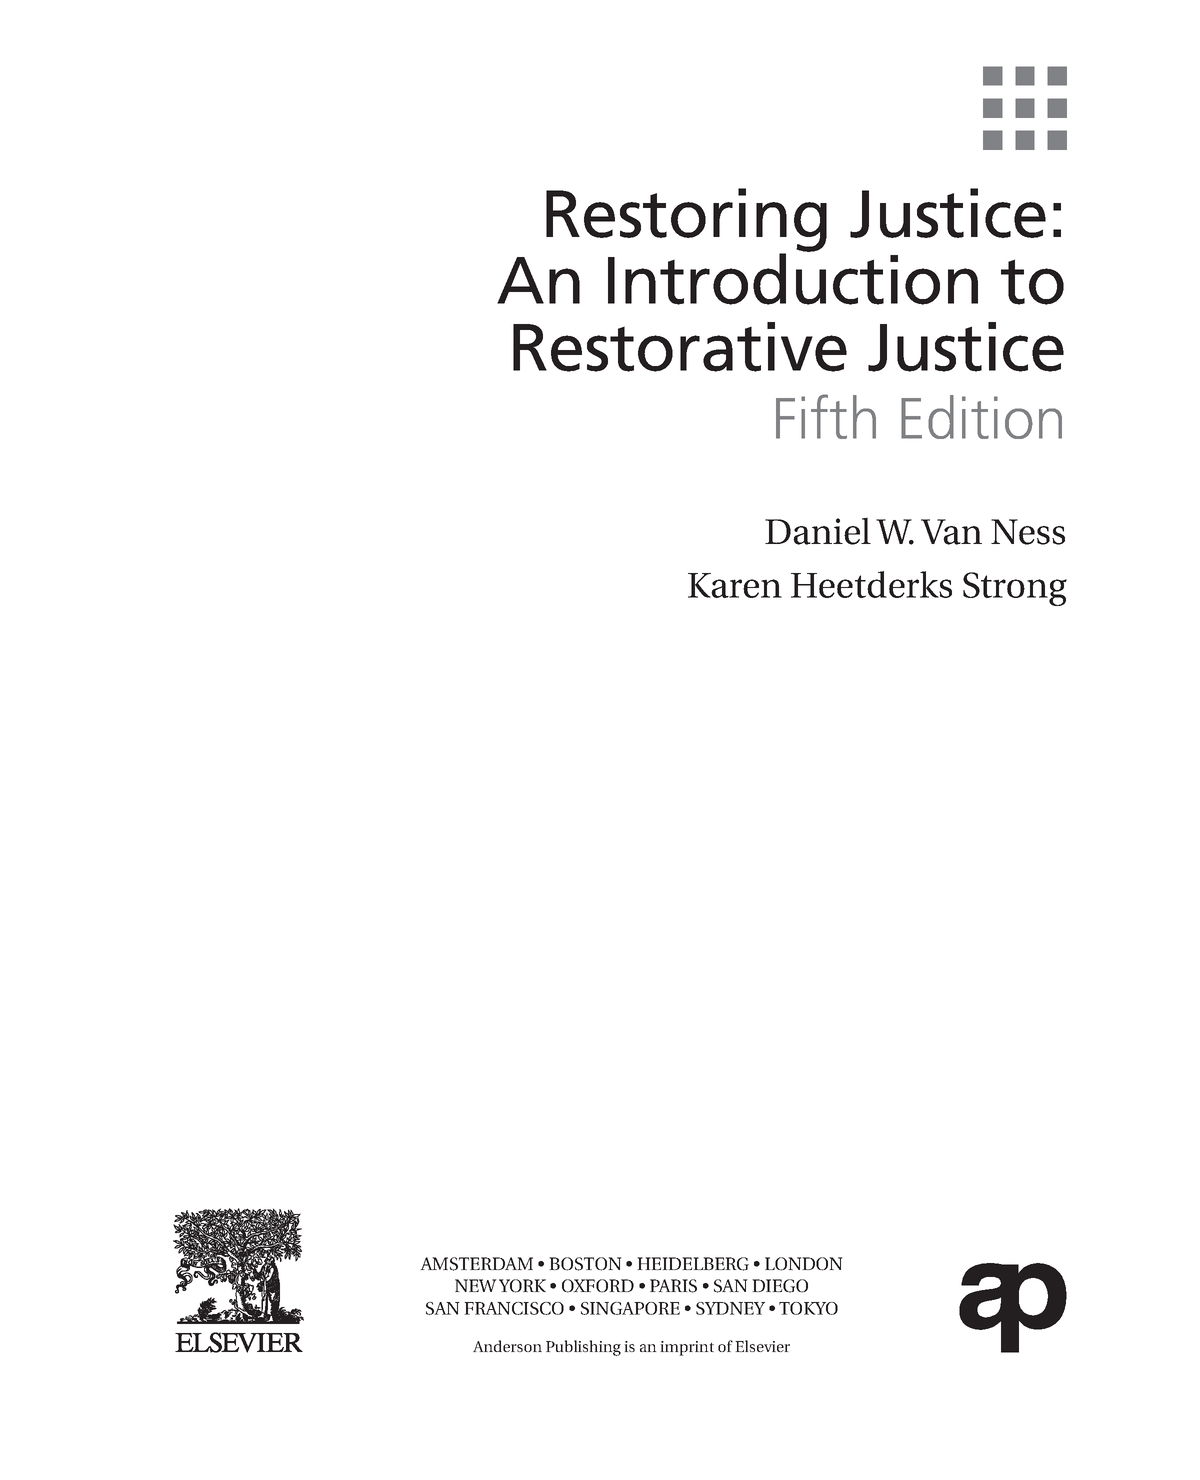 Restoring Justice. An Introduction to Restorative Justice 